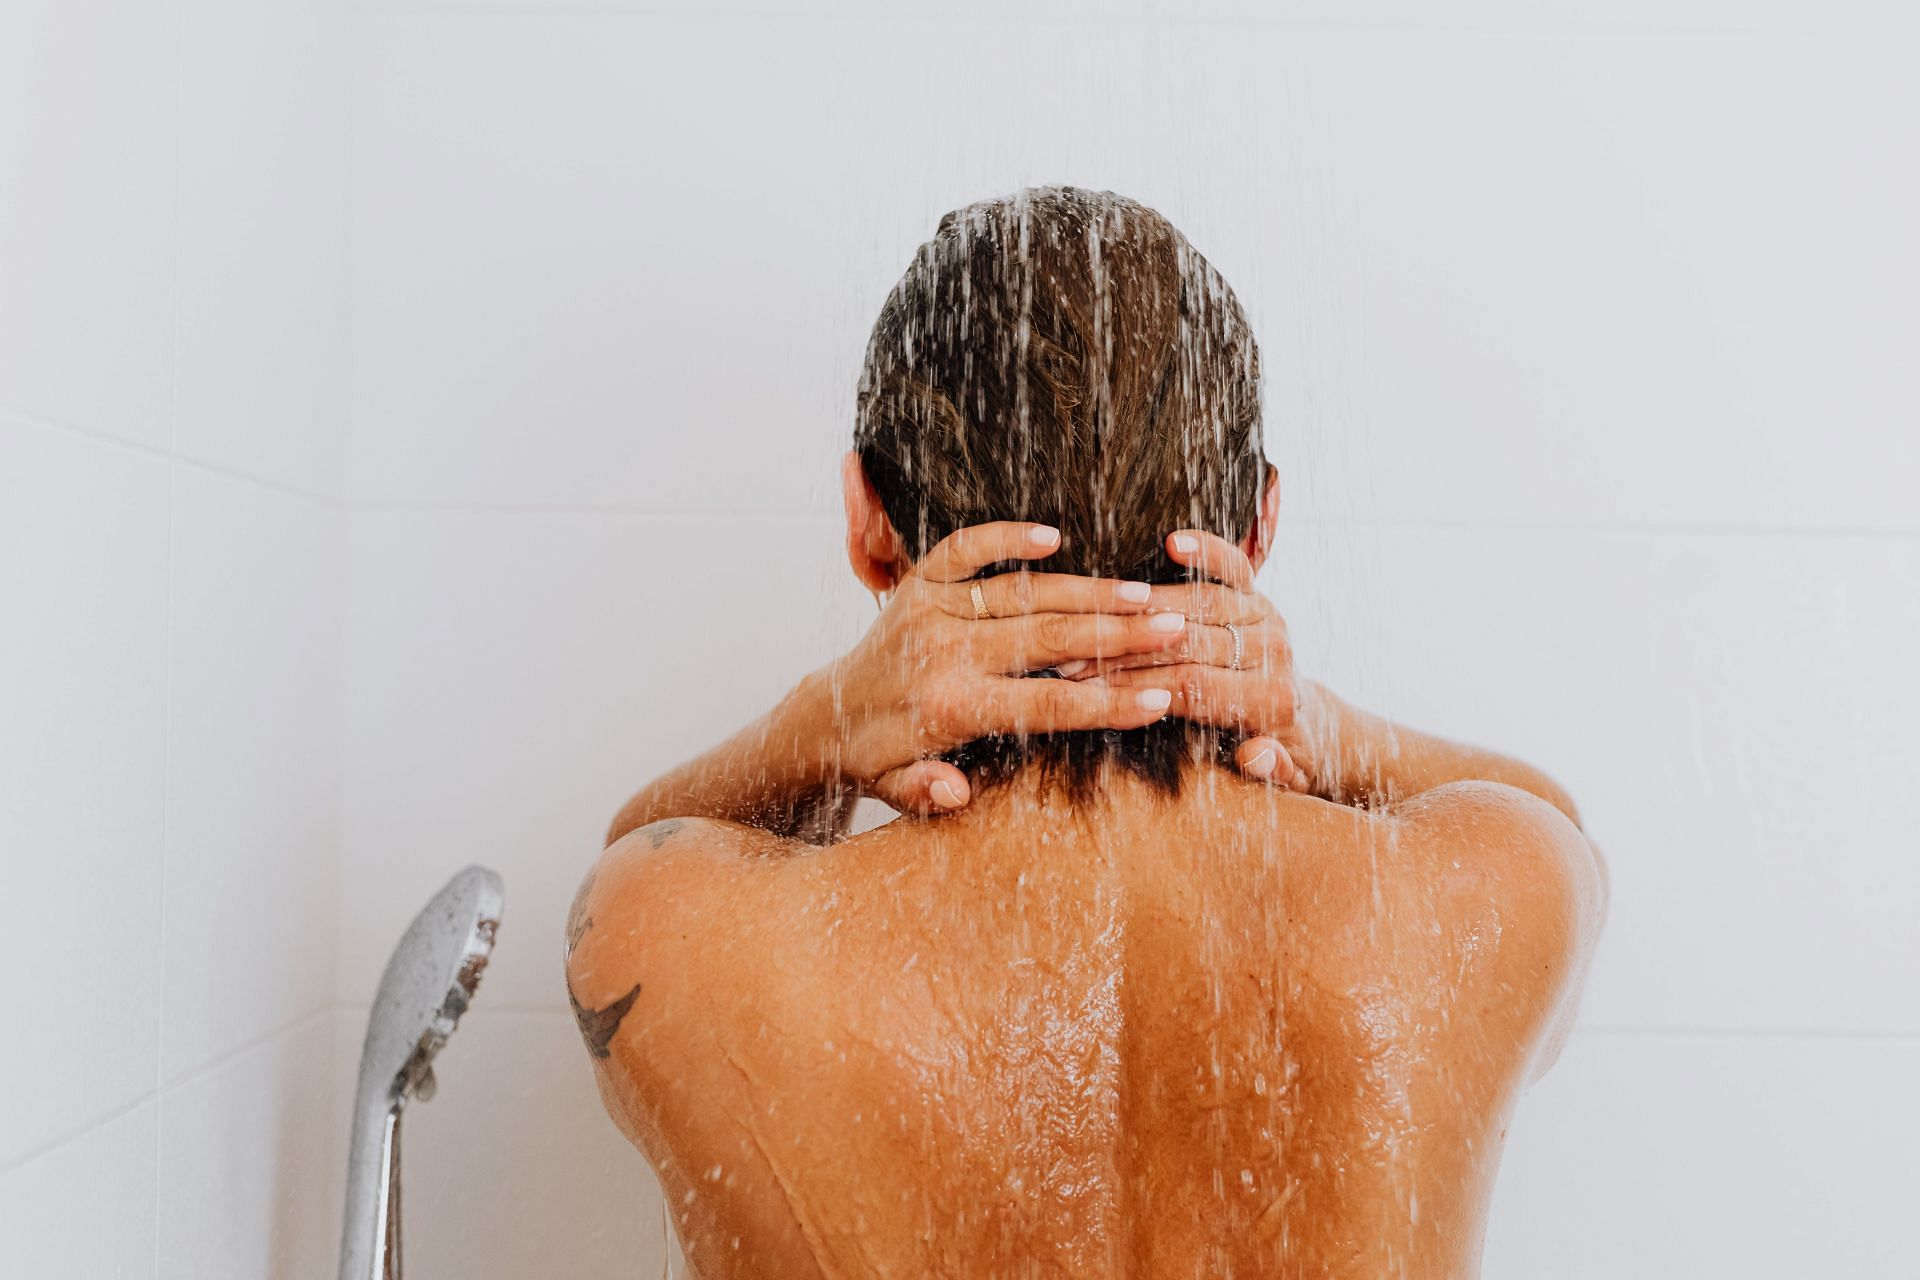 Will cold showers help burn fat and lose weight? (Image via Pexels)